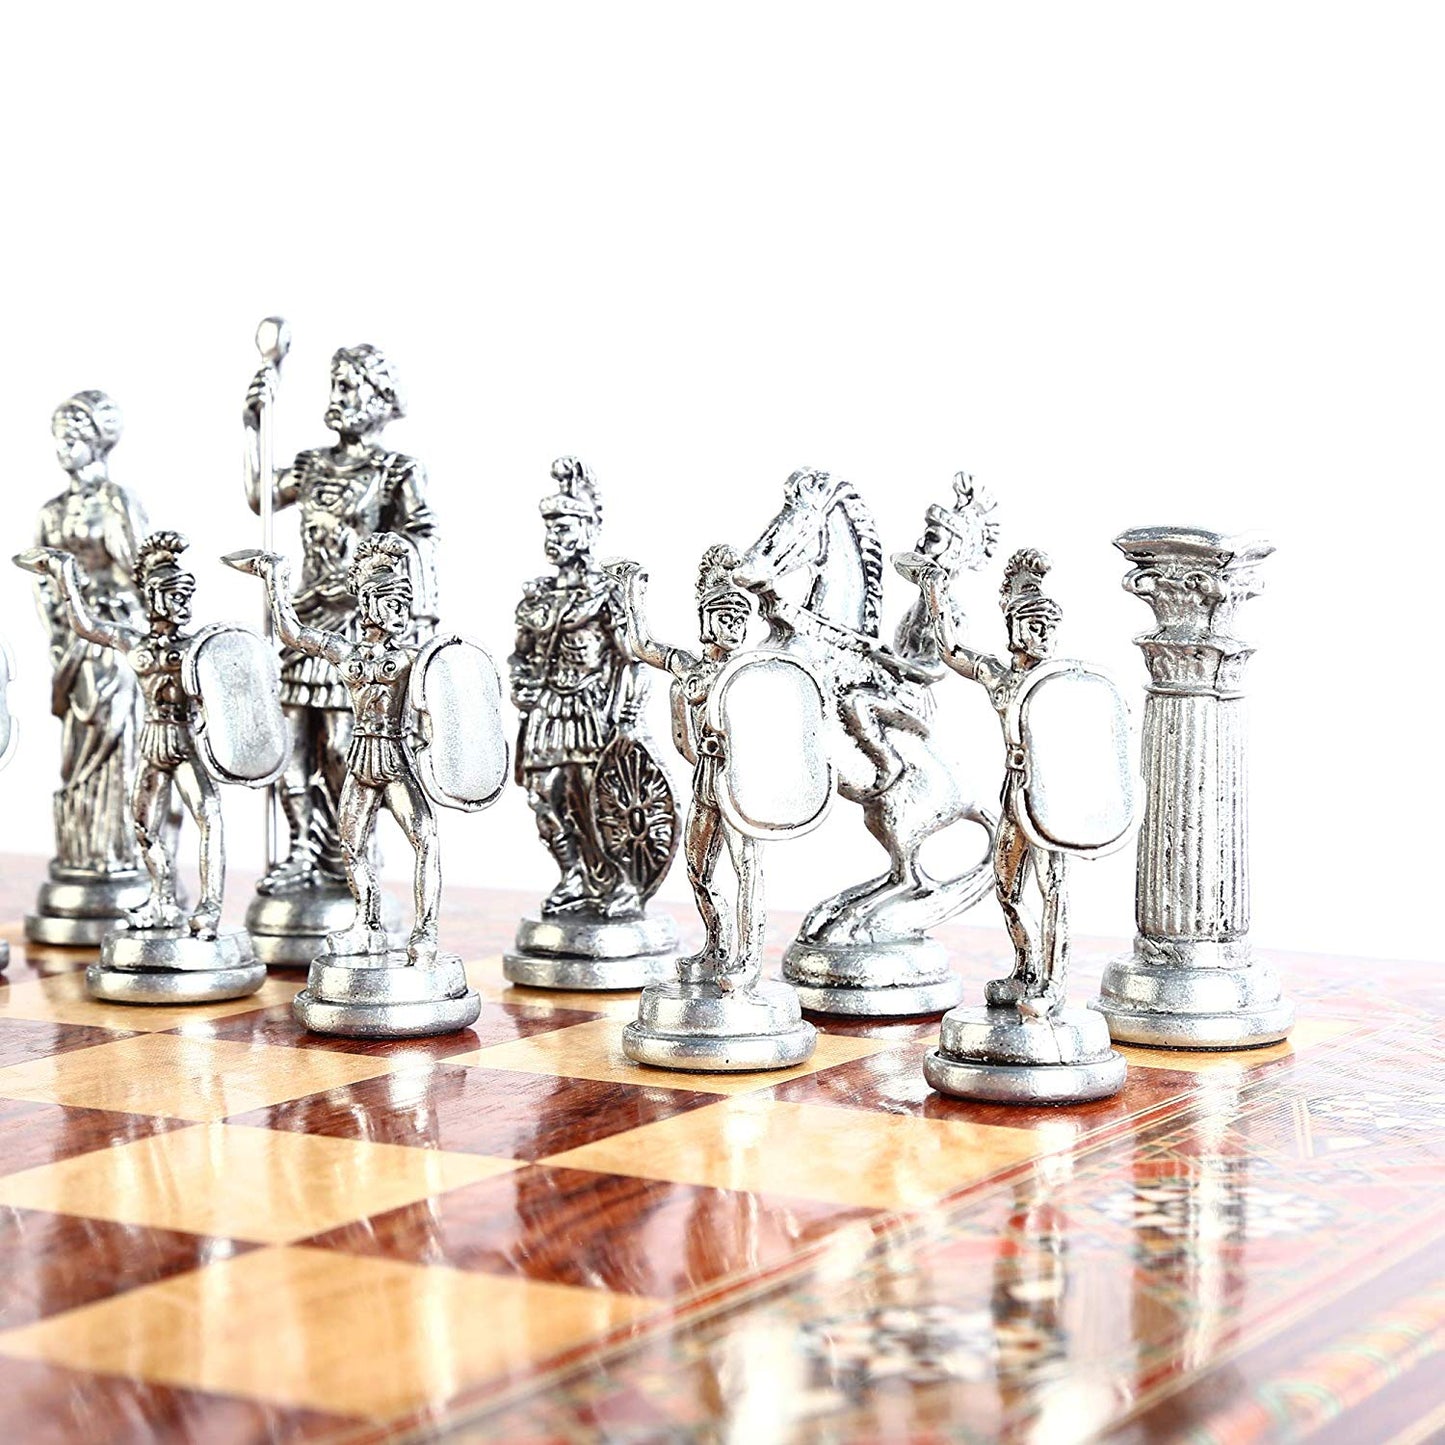 (Only Chess Pieces) Historical Antique Copper Rome Chess Pieces Sculptures and Statues (Board is Not Included)